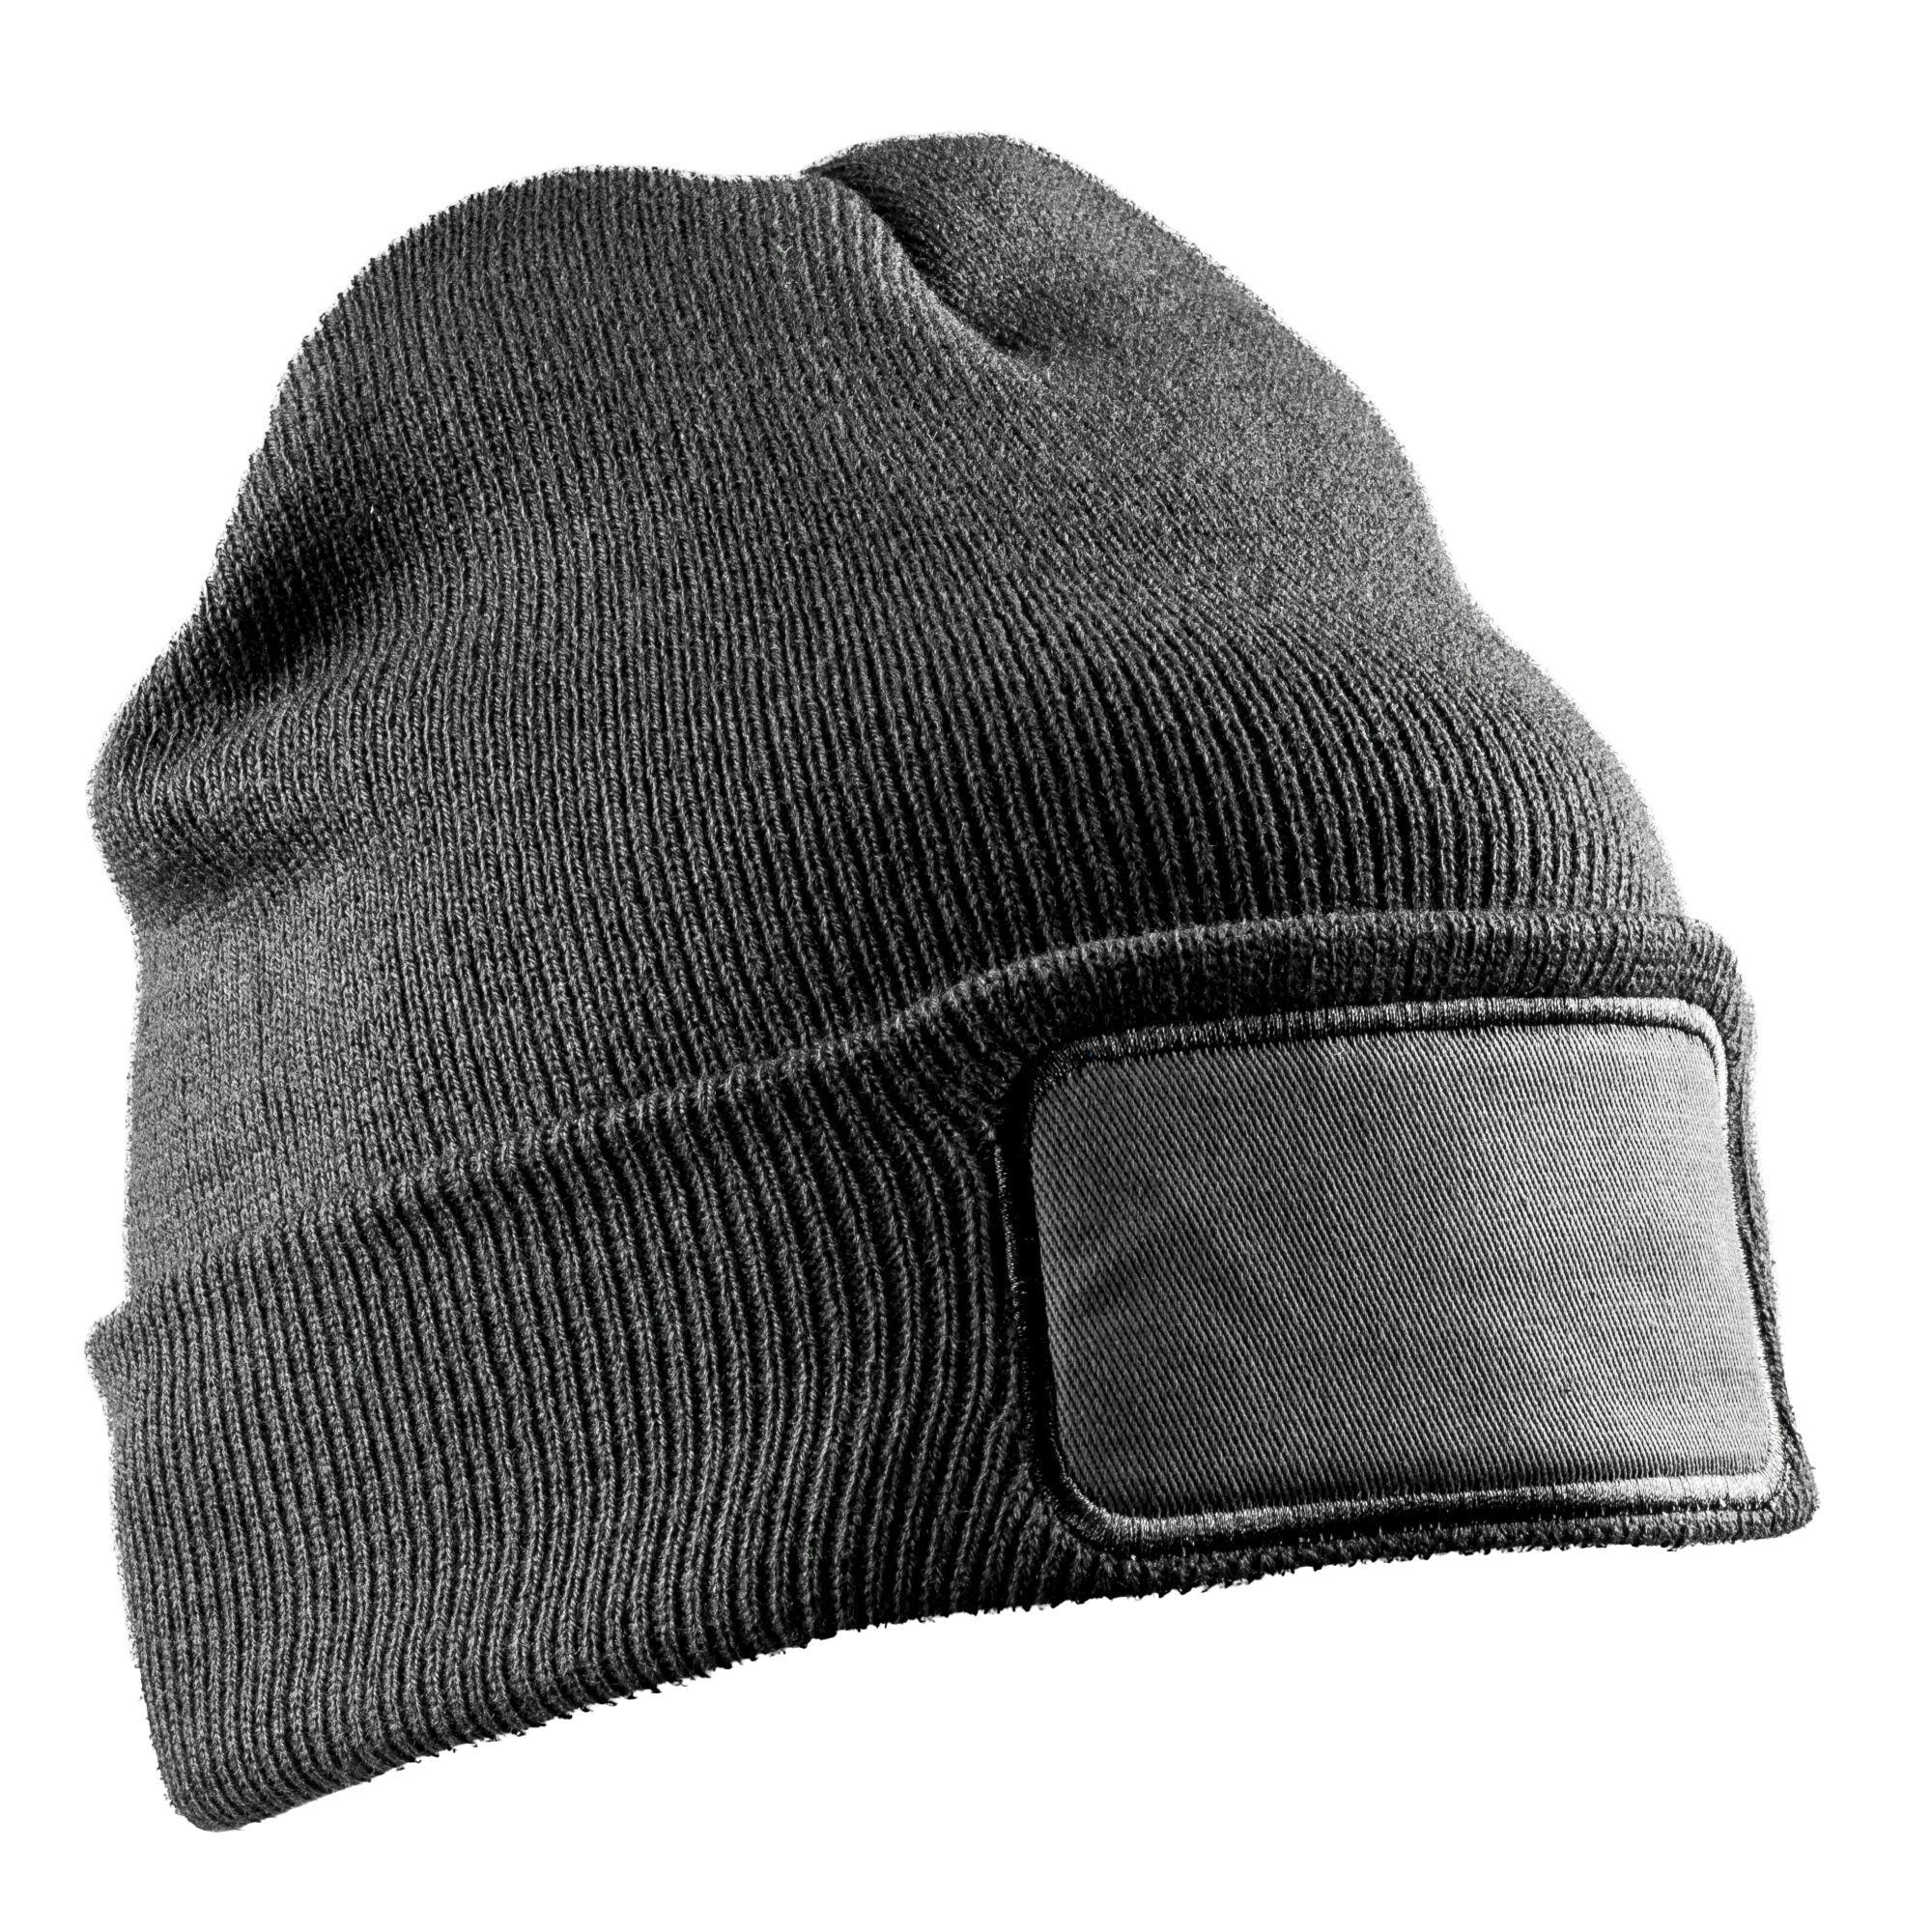 Result Unisex Adult Thinsulate Printable Winter Beanie (Grey) (One Size)